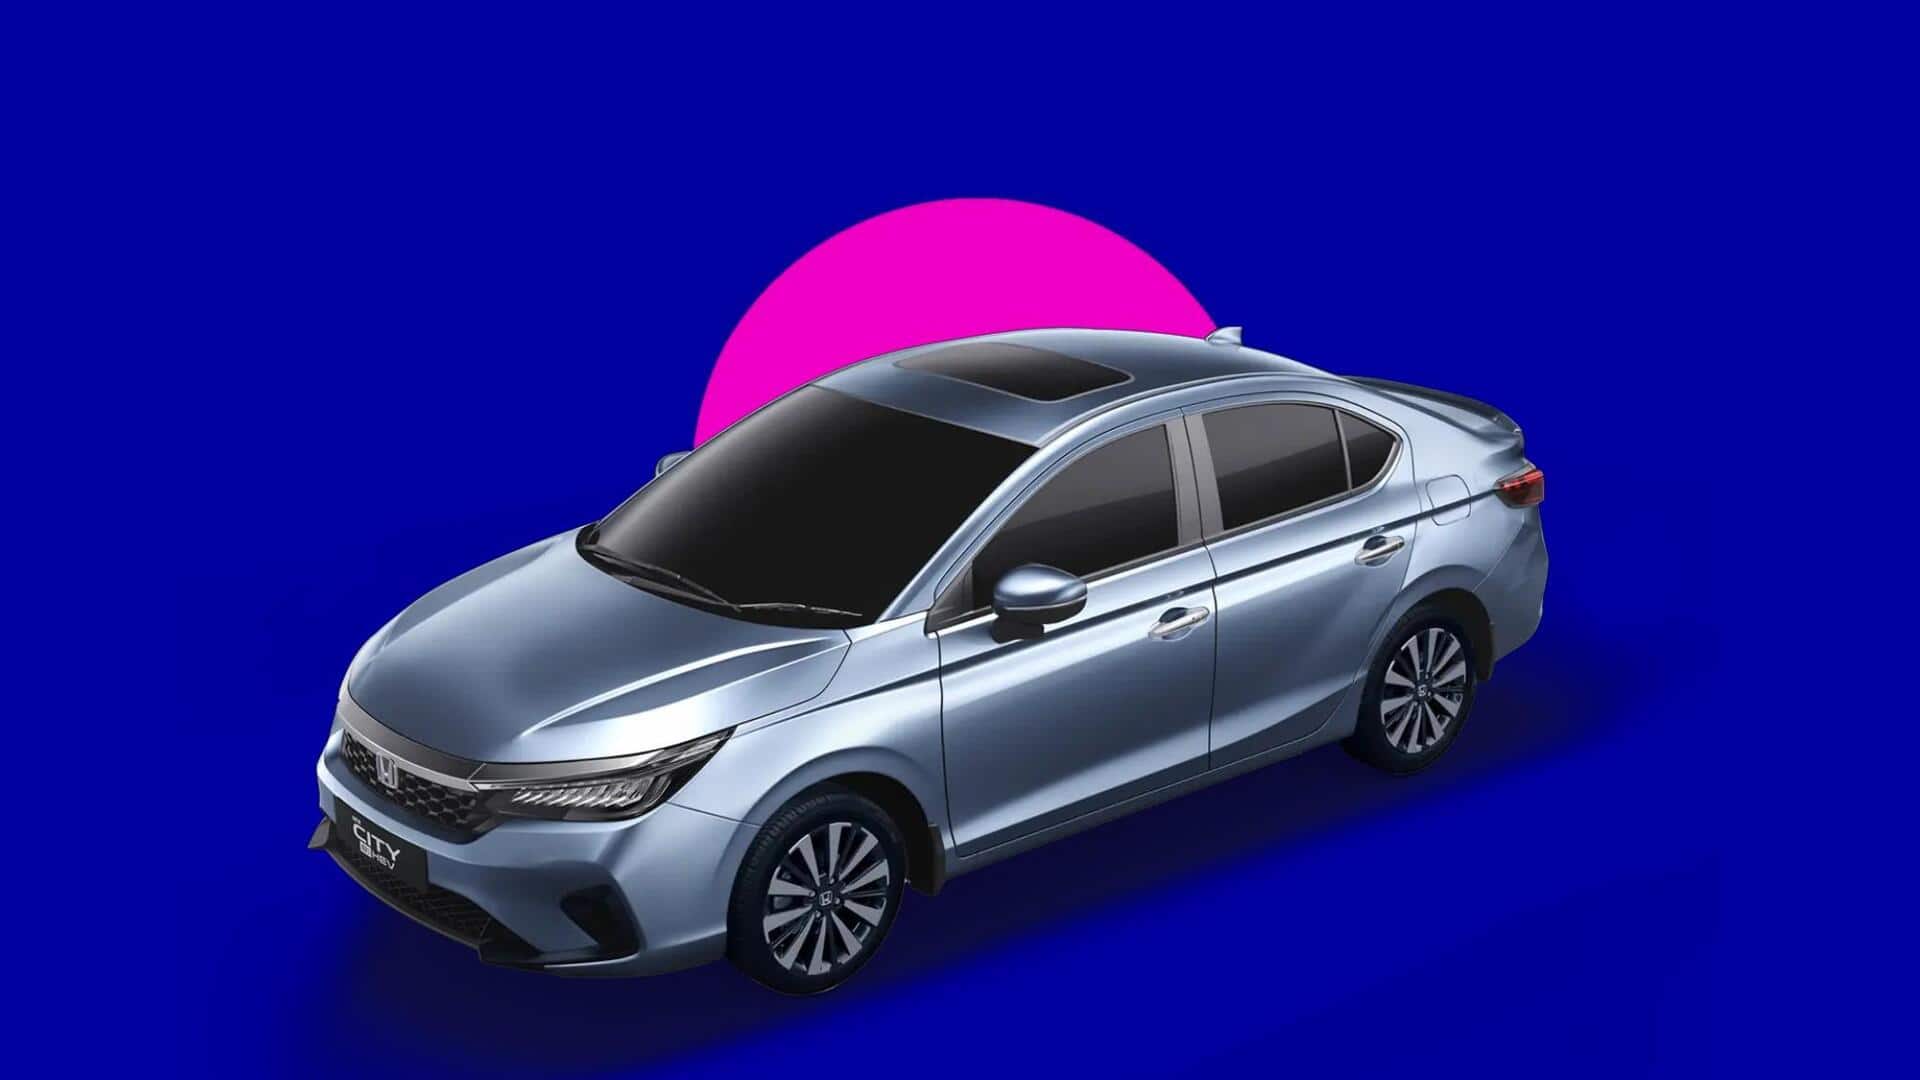 Honda introduces 'ultra-body coating' for cars: Know what it is